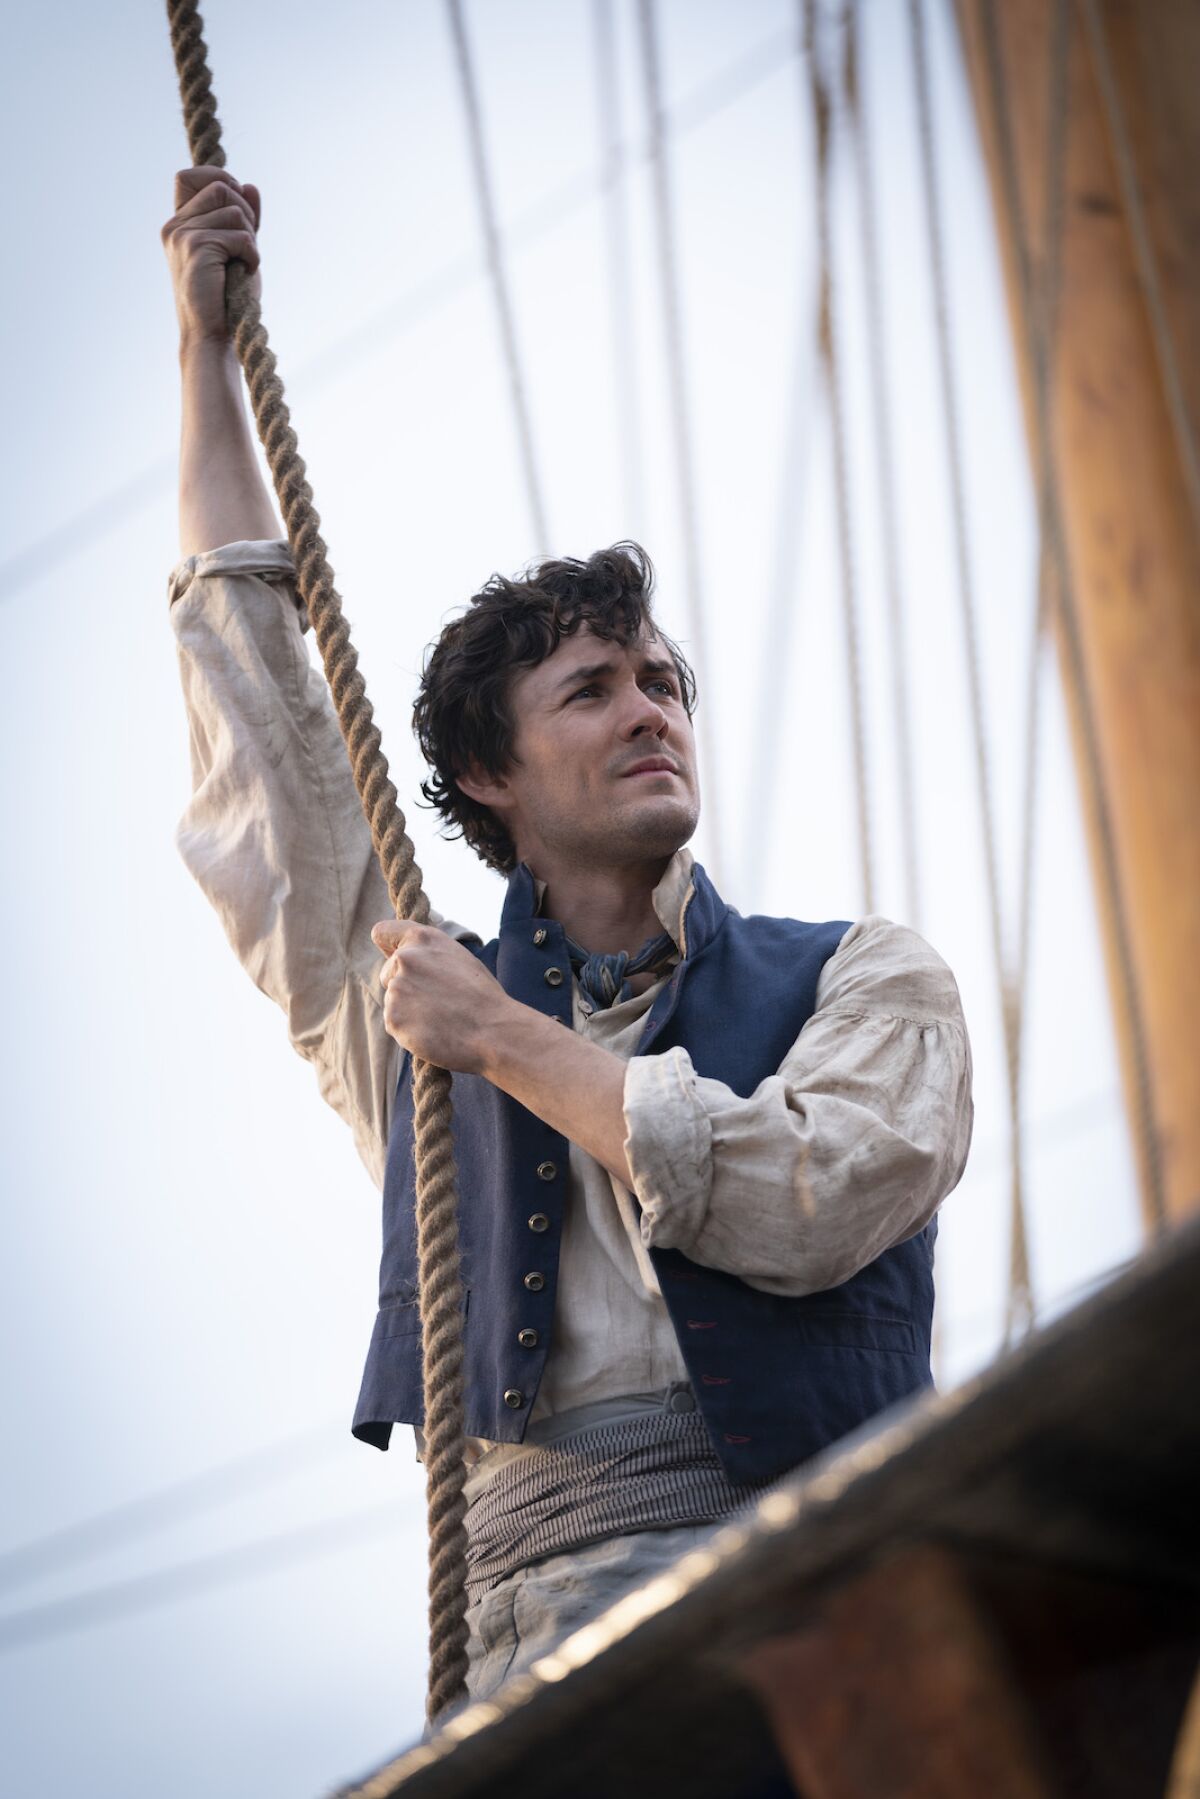 Jonah Hauer-King clings to ship's rigging in the movie "The Little Mermaid."